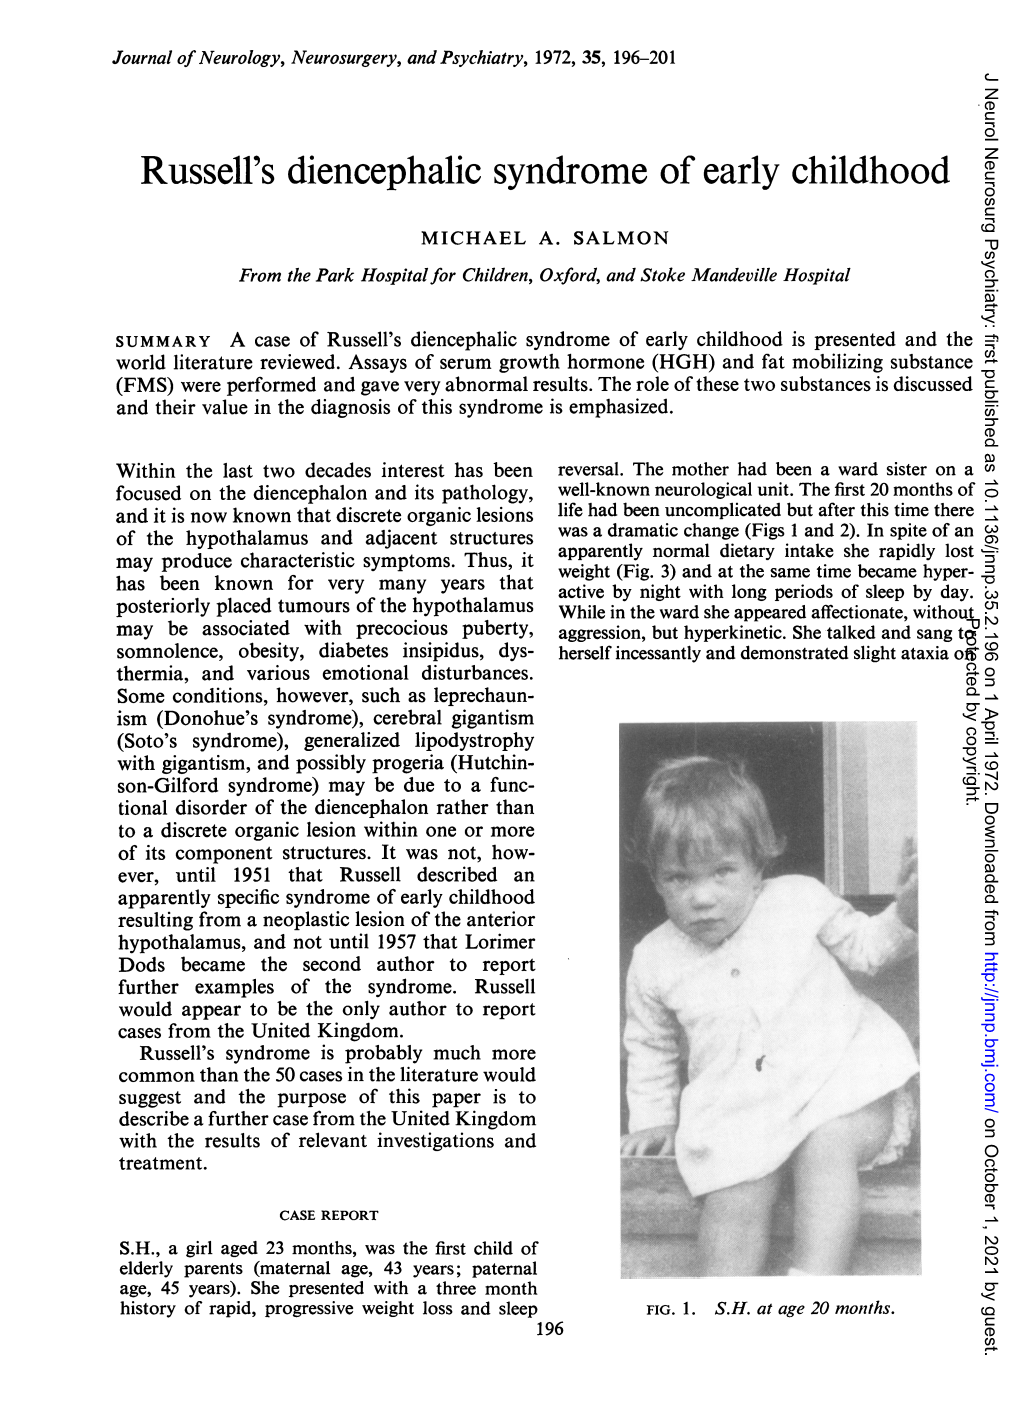 Russell's Diencephalic Syndrome of Early Childhood